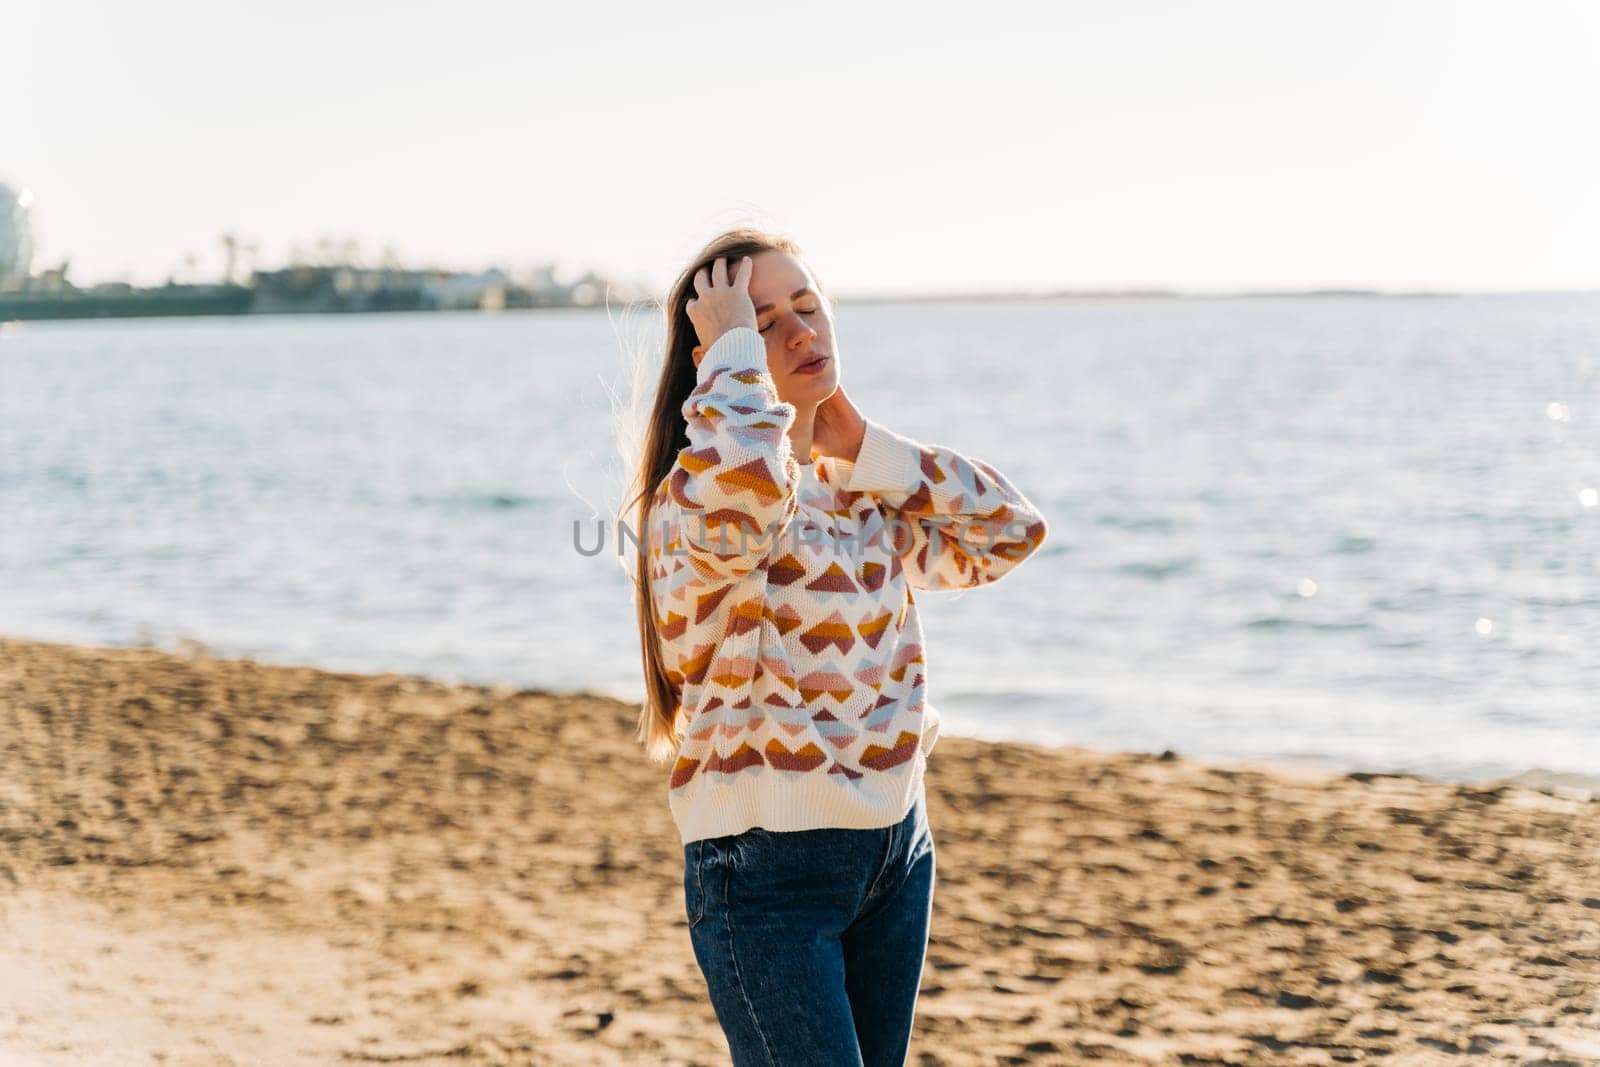 Young beautiful woman in cozy sweater smiling and enjoying sunbathe on the sand beach near winter ocean. Cute attractive girl relaxing under the sun on autumn seaside shore.